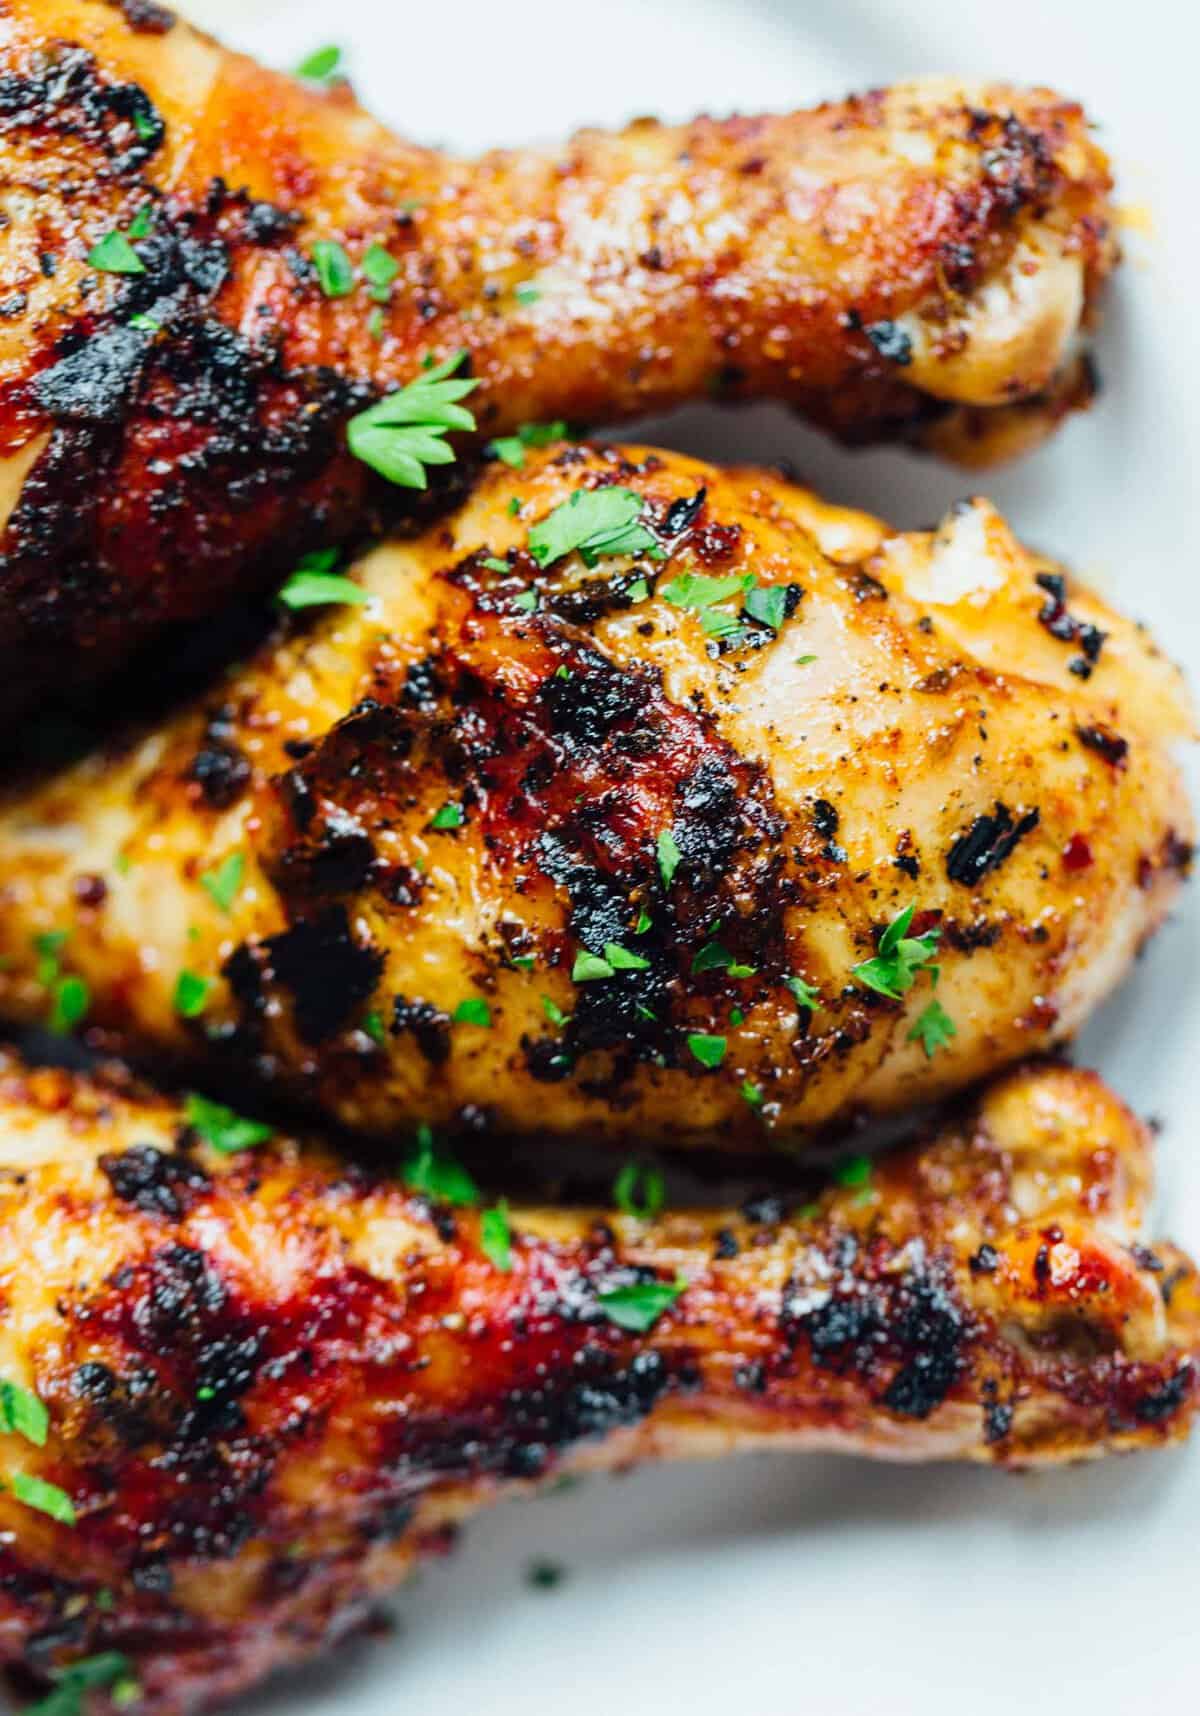 Grilled peri peri chicken drumsticks are the perfect addition to your summer grilling menu! They're easy to prepare and they are packed with flavor! #chicken #chickendinner #svorganic #periperi #drumsticks #chickenrecipes #grilling #grilledchicken #grillrecipes